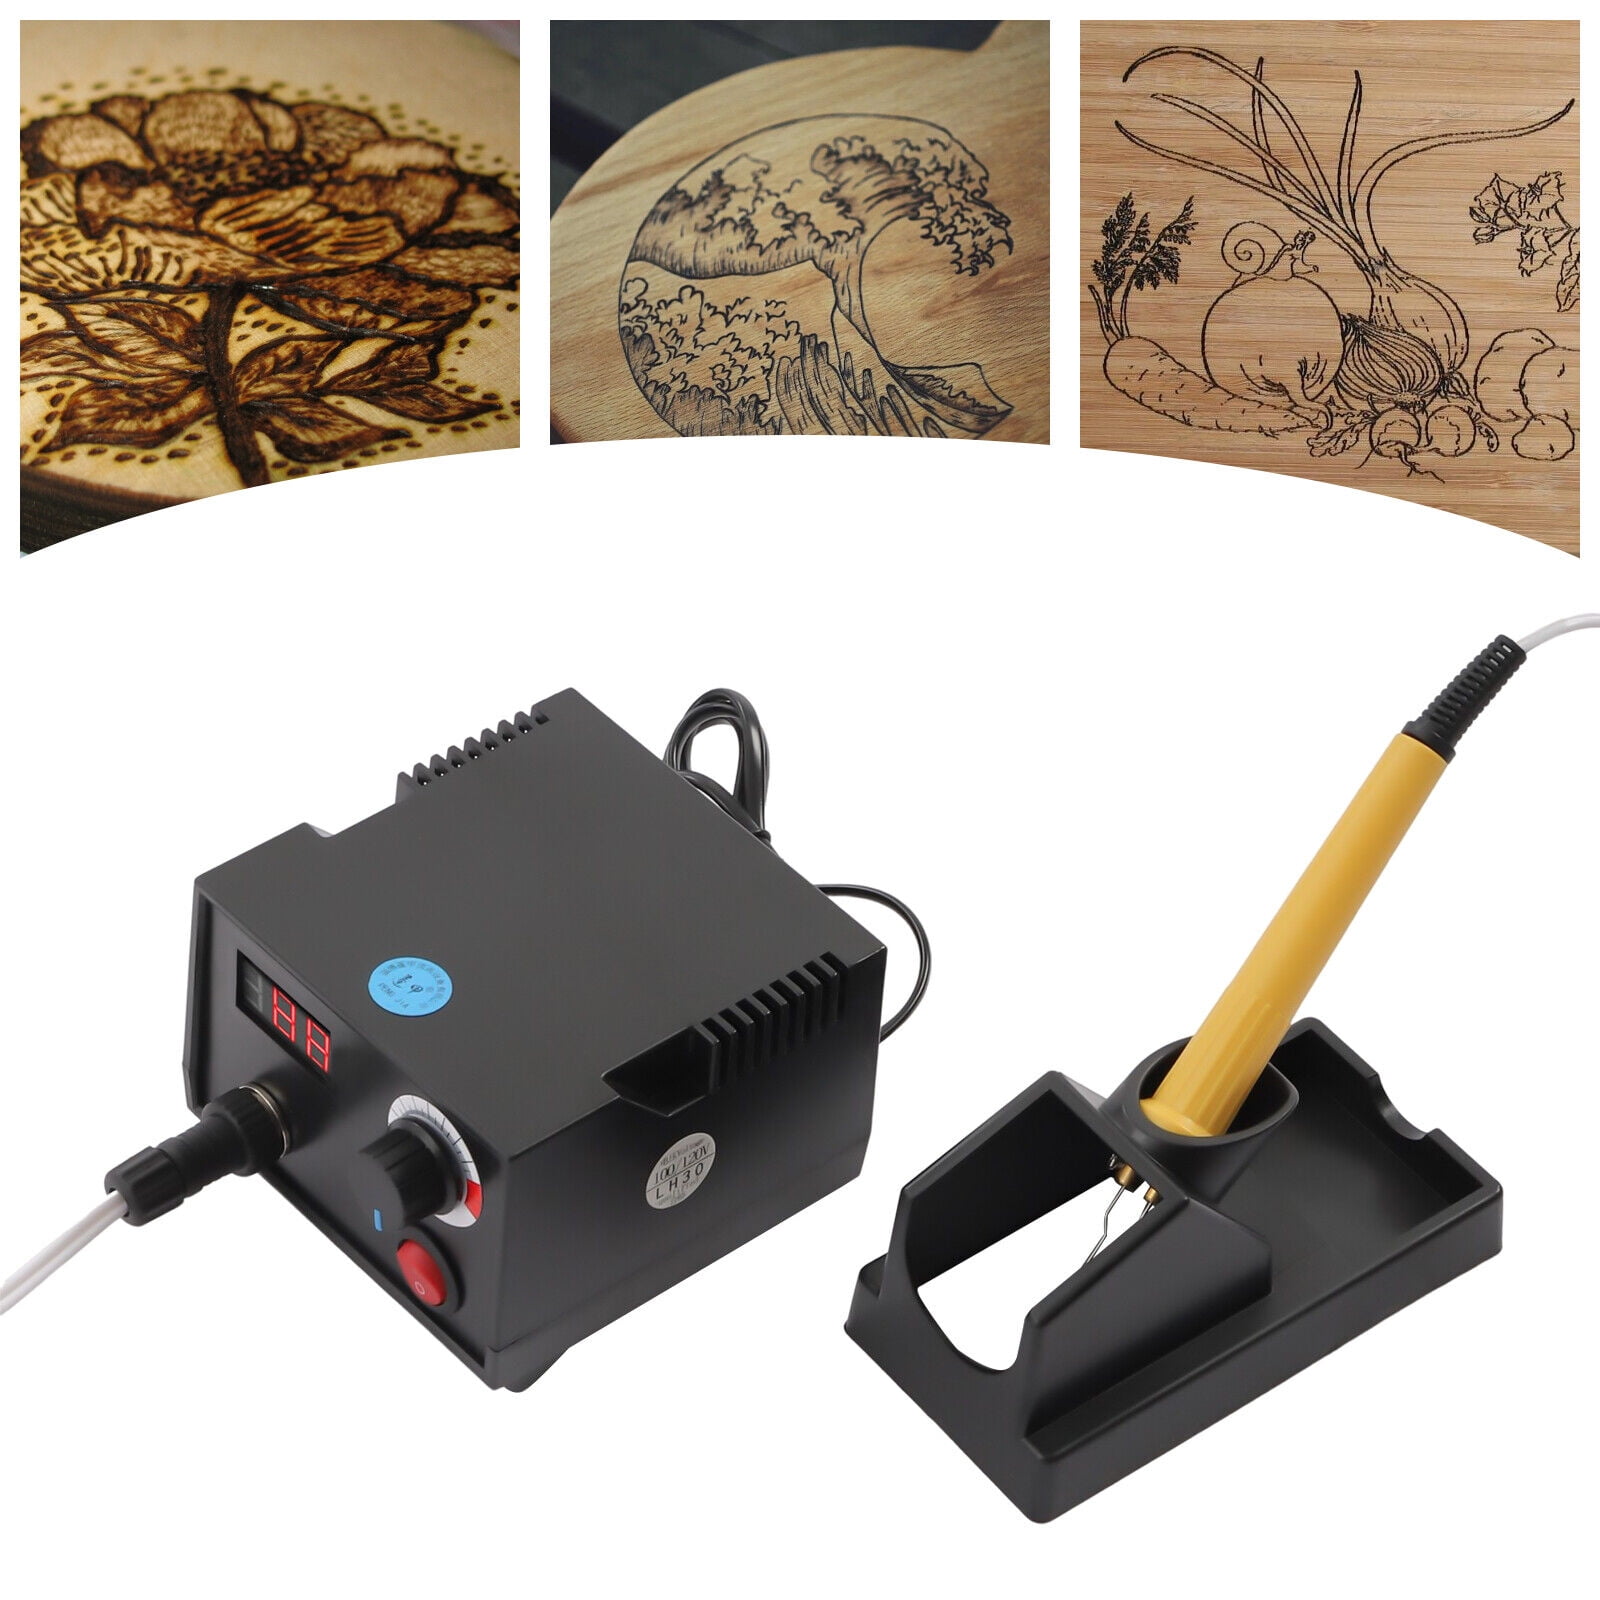 Pyrography Wood Burning Kit for Adults, Beginners, and Professionals, Wood  Burning Pen with 8 Tips, Wood Burner Tool for Woodburning Crafts by  Chandler Tool﻿